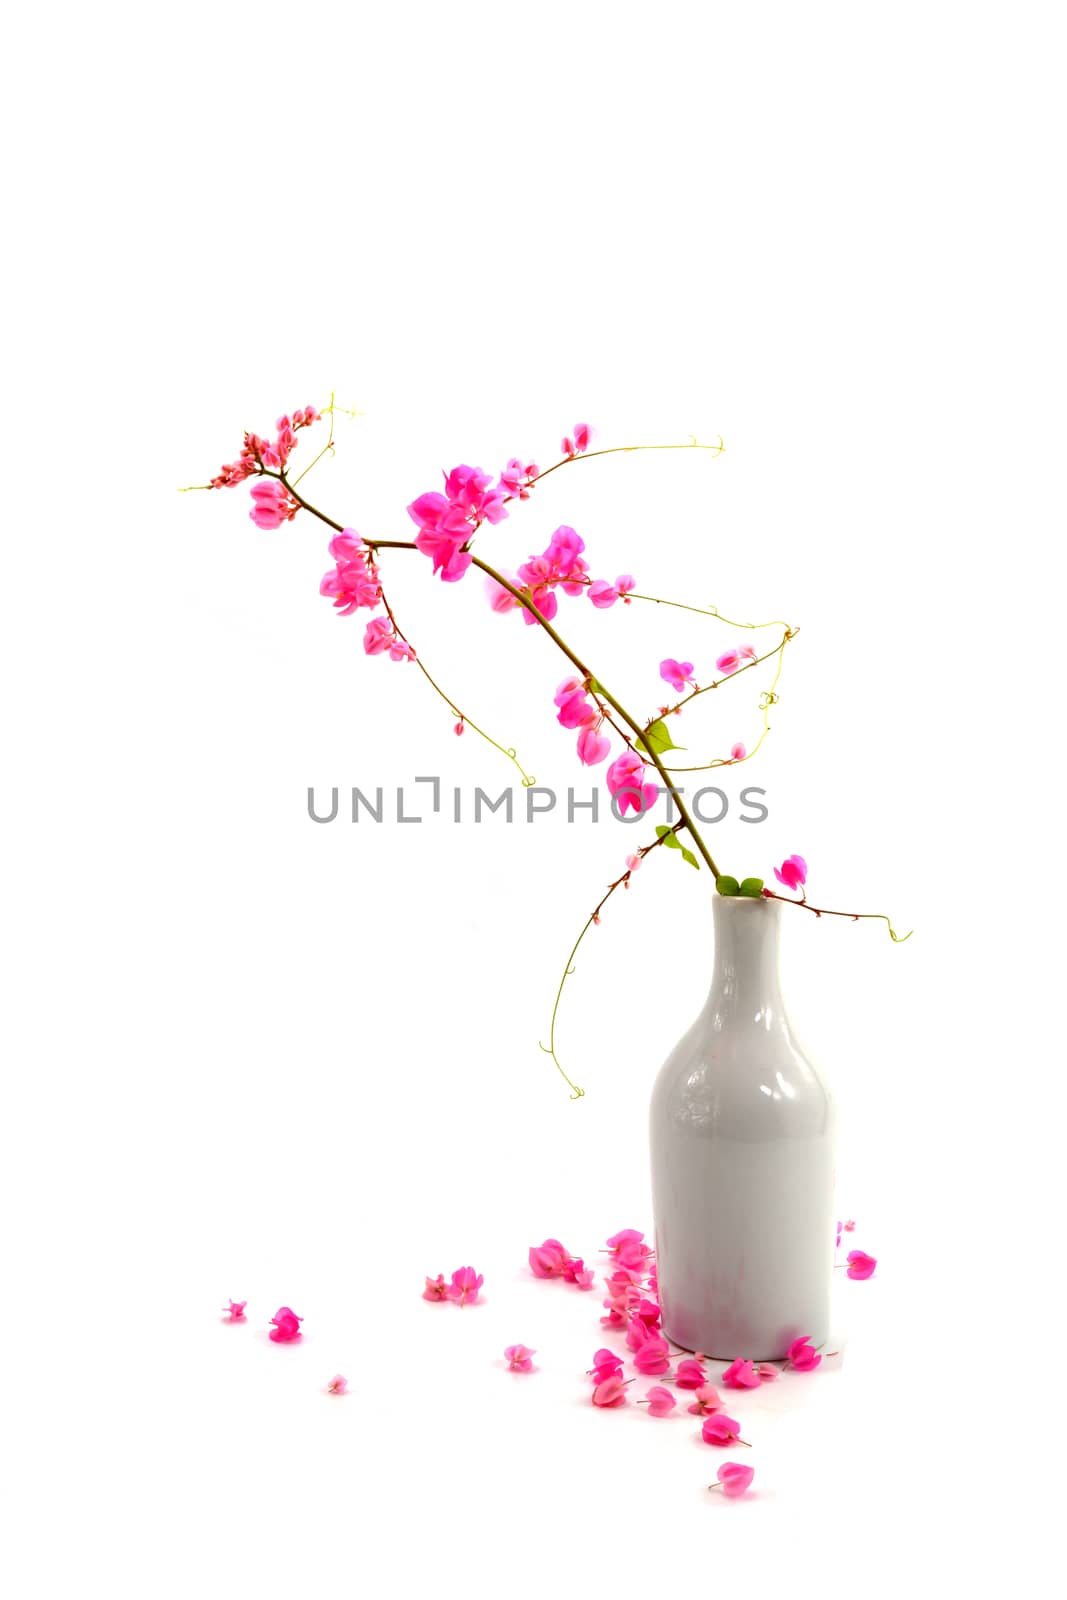 Pink flower on a white background. (Coral Vine, Mexican Creeper, Chain of Love)